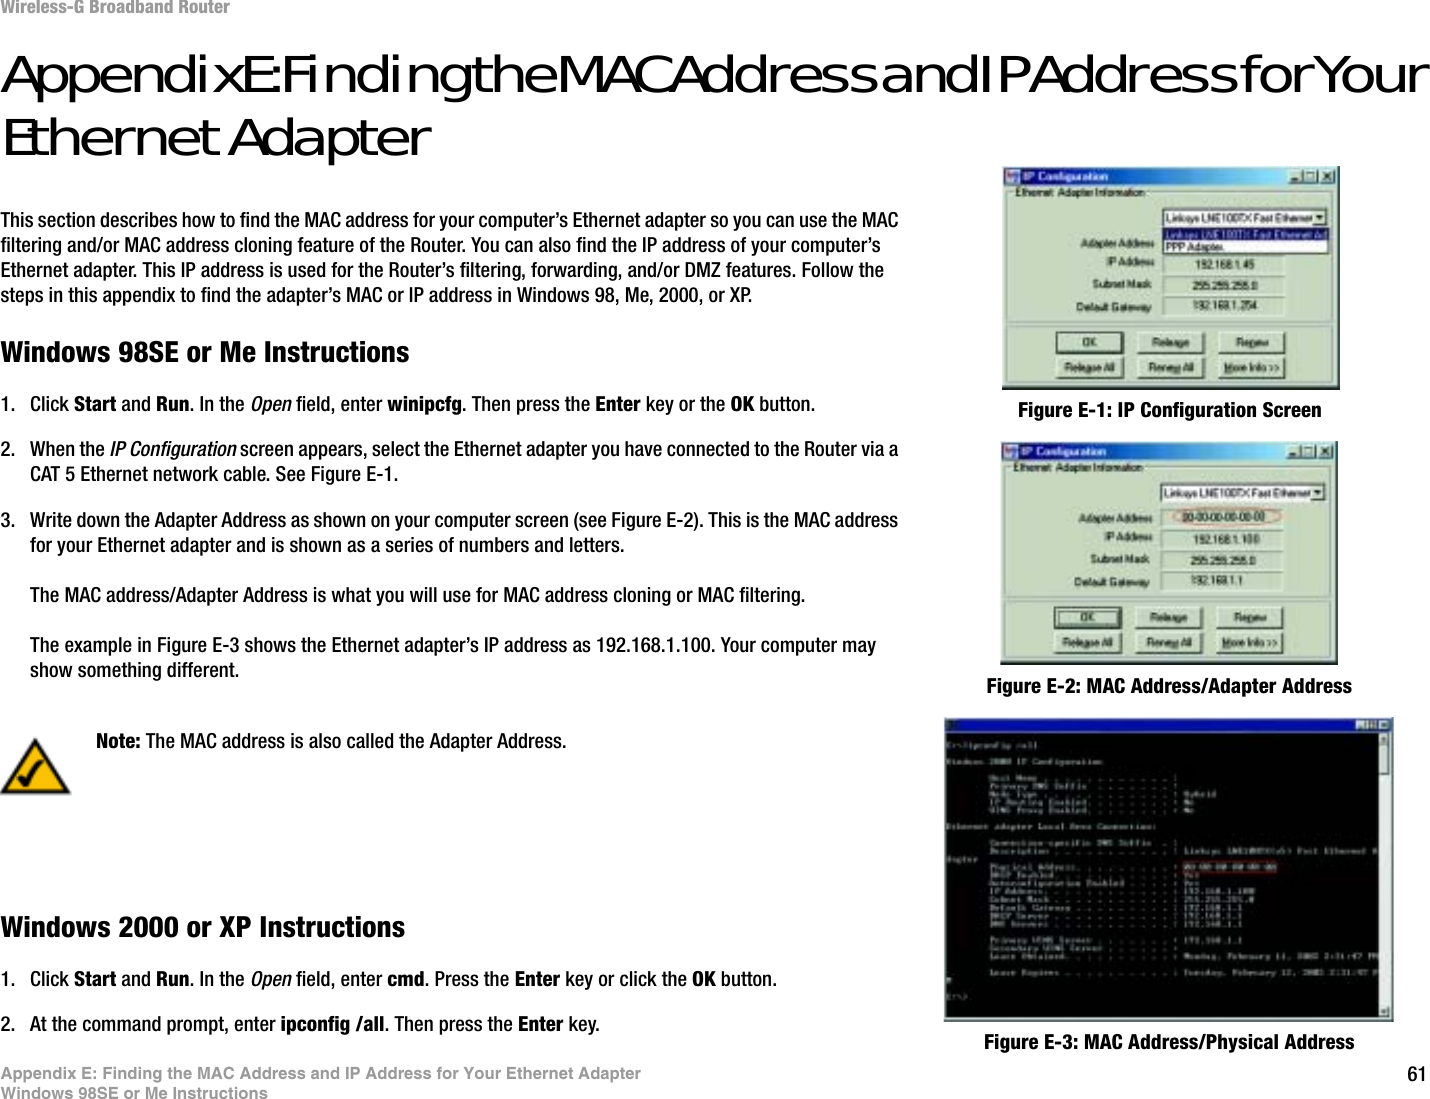 61Appendix E: Finding the MAC Address and IP Address for Your Ethernet AdapterWindows 98SE or Me InstructionsWireless-G Broadband RouterAppendix E: Finding the MAC Address and IP Address for Your Ethernet AdapterThis section describes how to find the MAC address for your computer’s Ethernet adapter so you can use the MAC filtering and/or MAC address cloning feature of the Router. You can also find the IP address of your computer’s Ethernet adapter. This IP address is used for the Router’s filtering, forwarding, and/or DMZ features. Follow the steps in this appendix to find the adapter’s MAC or IP address in Windows 98, Me, 2000, or XP.Windows 98SE or Me Instructions1. Click Start and Run. In the Open field, enter winipcfg. Then press the Enter key or the OK button. 2. When the IP Configuration screen appears, select the Ethernet adapter you have connected to the Router via a CAT 5 Ethernet network cable. See Figure E-1.3. Write down the Adapter Address as shown on your computer screen (see Figure E-2). This is the MAC address for your Ethernet adapter and is shown as a series of numbers and letters.The MAC address/Adapter Address is what you will use for MAC address cloning or MAC filtering.The example in Figure E-3 shows the Ethernet adapter’s IP address as 192.168.1.100. Your computer may show something different.Windows 2000 or XP Instructions1. Click Start and Run. In the Open field, enter cmd. Press the Enter key or click the OK button.2. At the command prompt, enter ipconfig /all. Then press the Enter key.Figure E-2: MAC Address/Adapter AddressFigure E-1: IP Configuration ScreenNote: The MAC address is also called the Adapter Address.Figure E-3: MAC Address/Physical Address